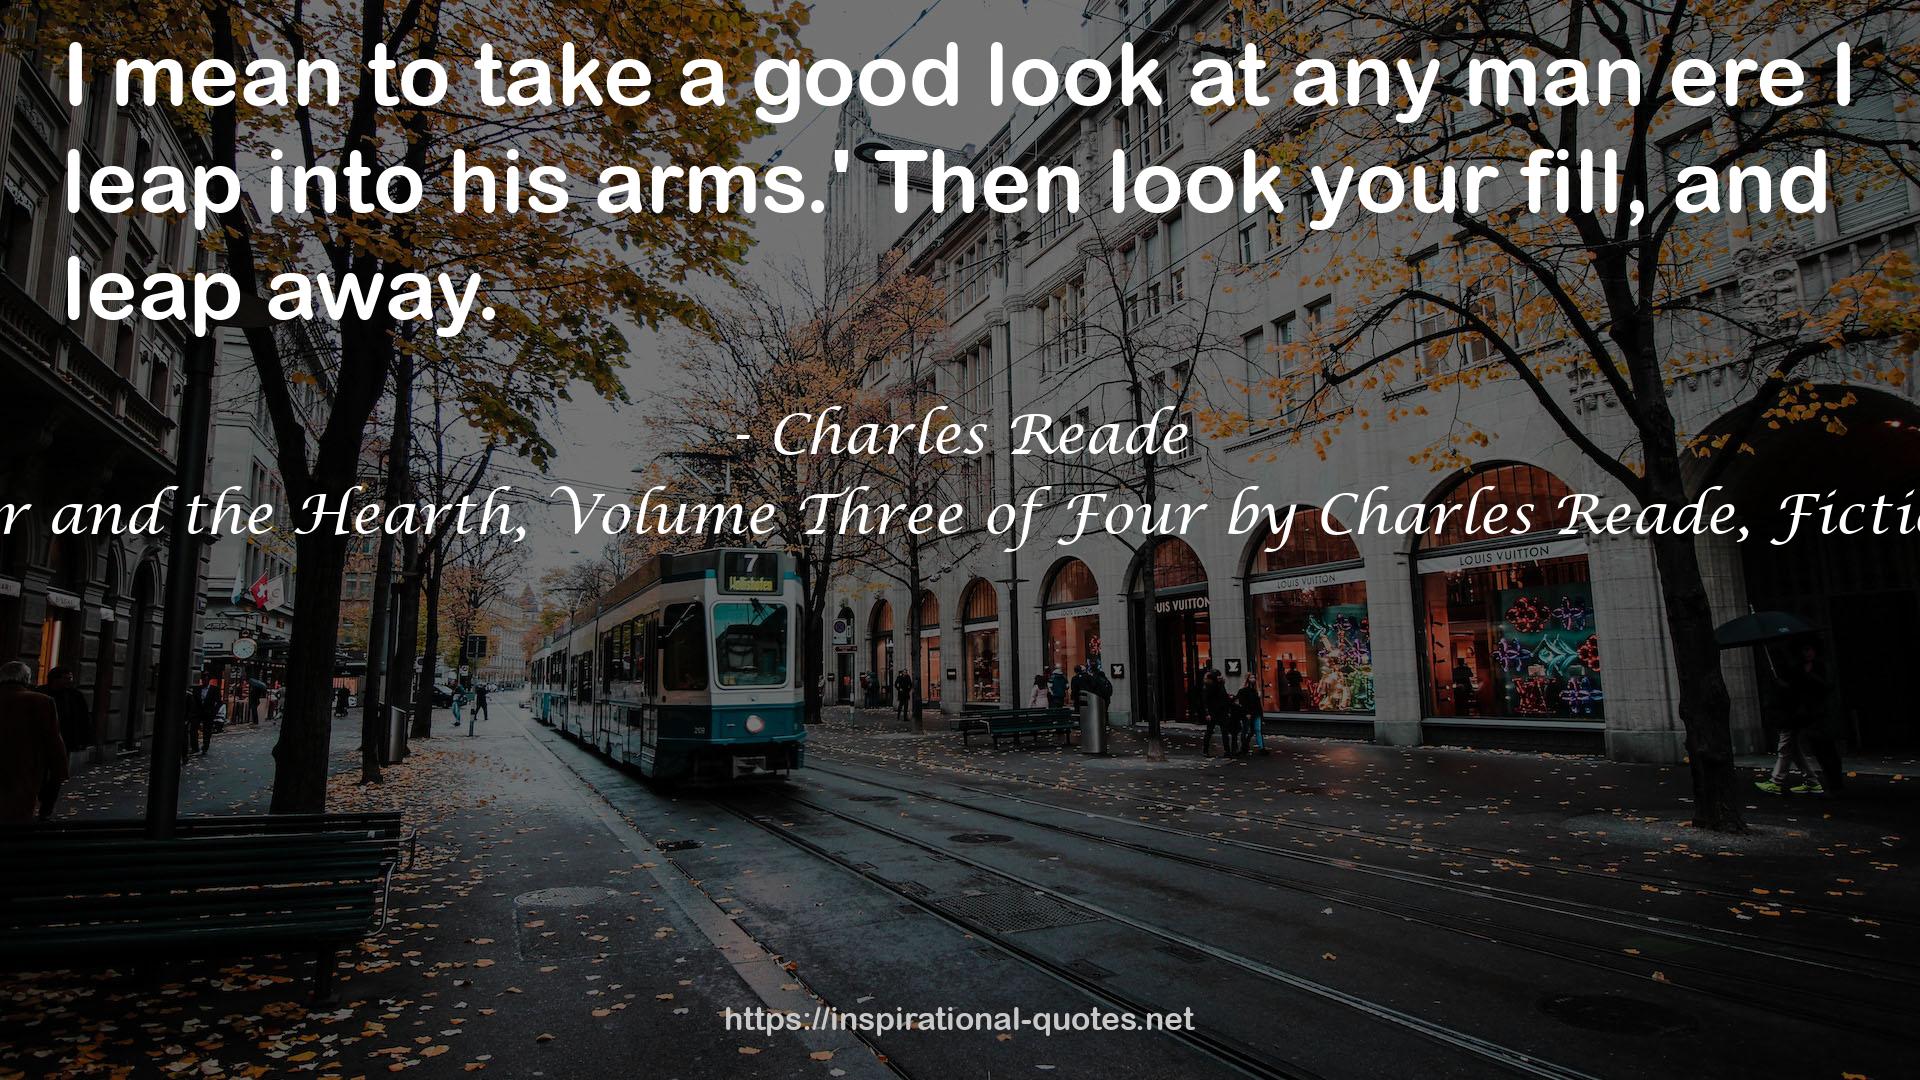 The Cloister and the Hearth, Volume Three of Four by Charles Reade, Fiction, Classics QUOTES